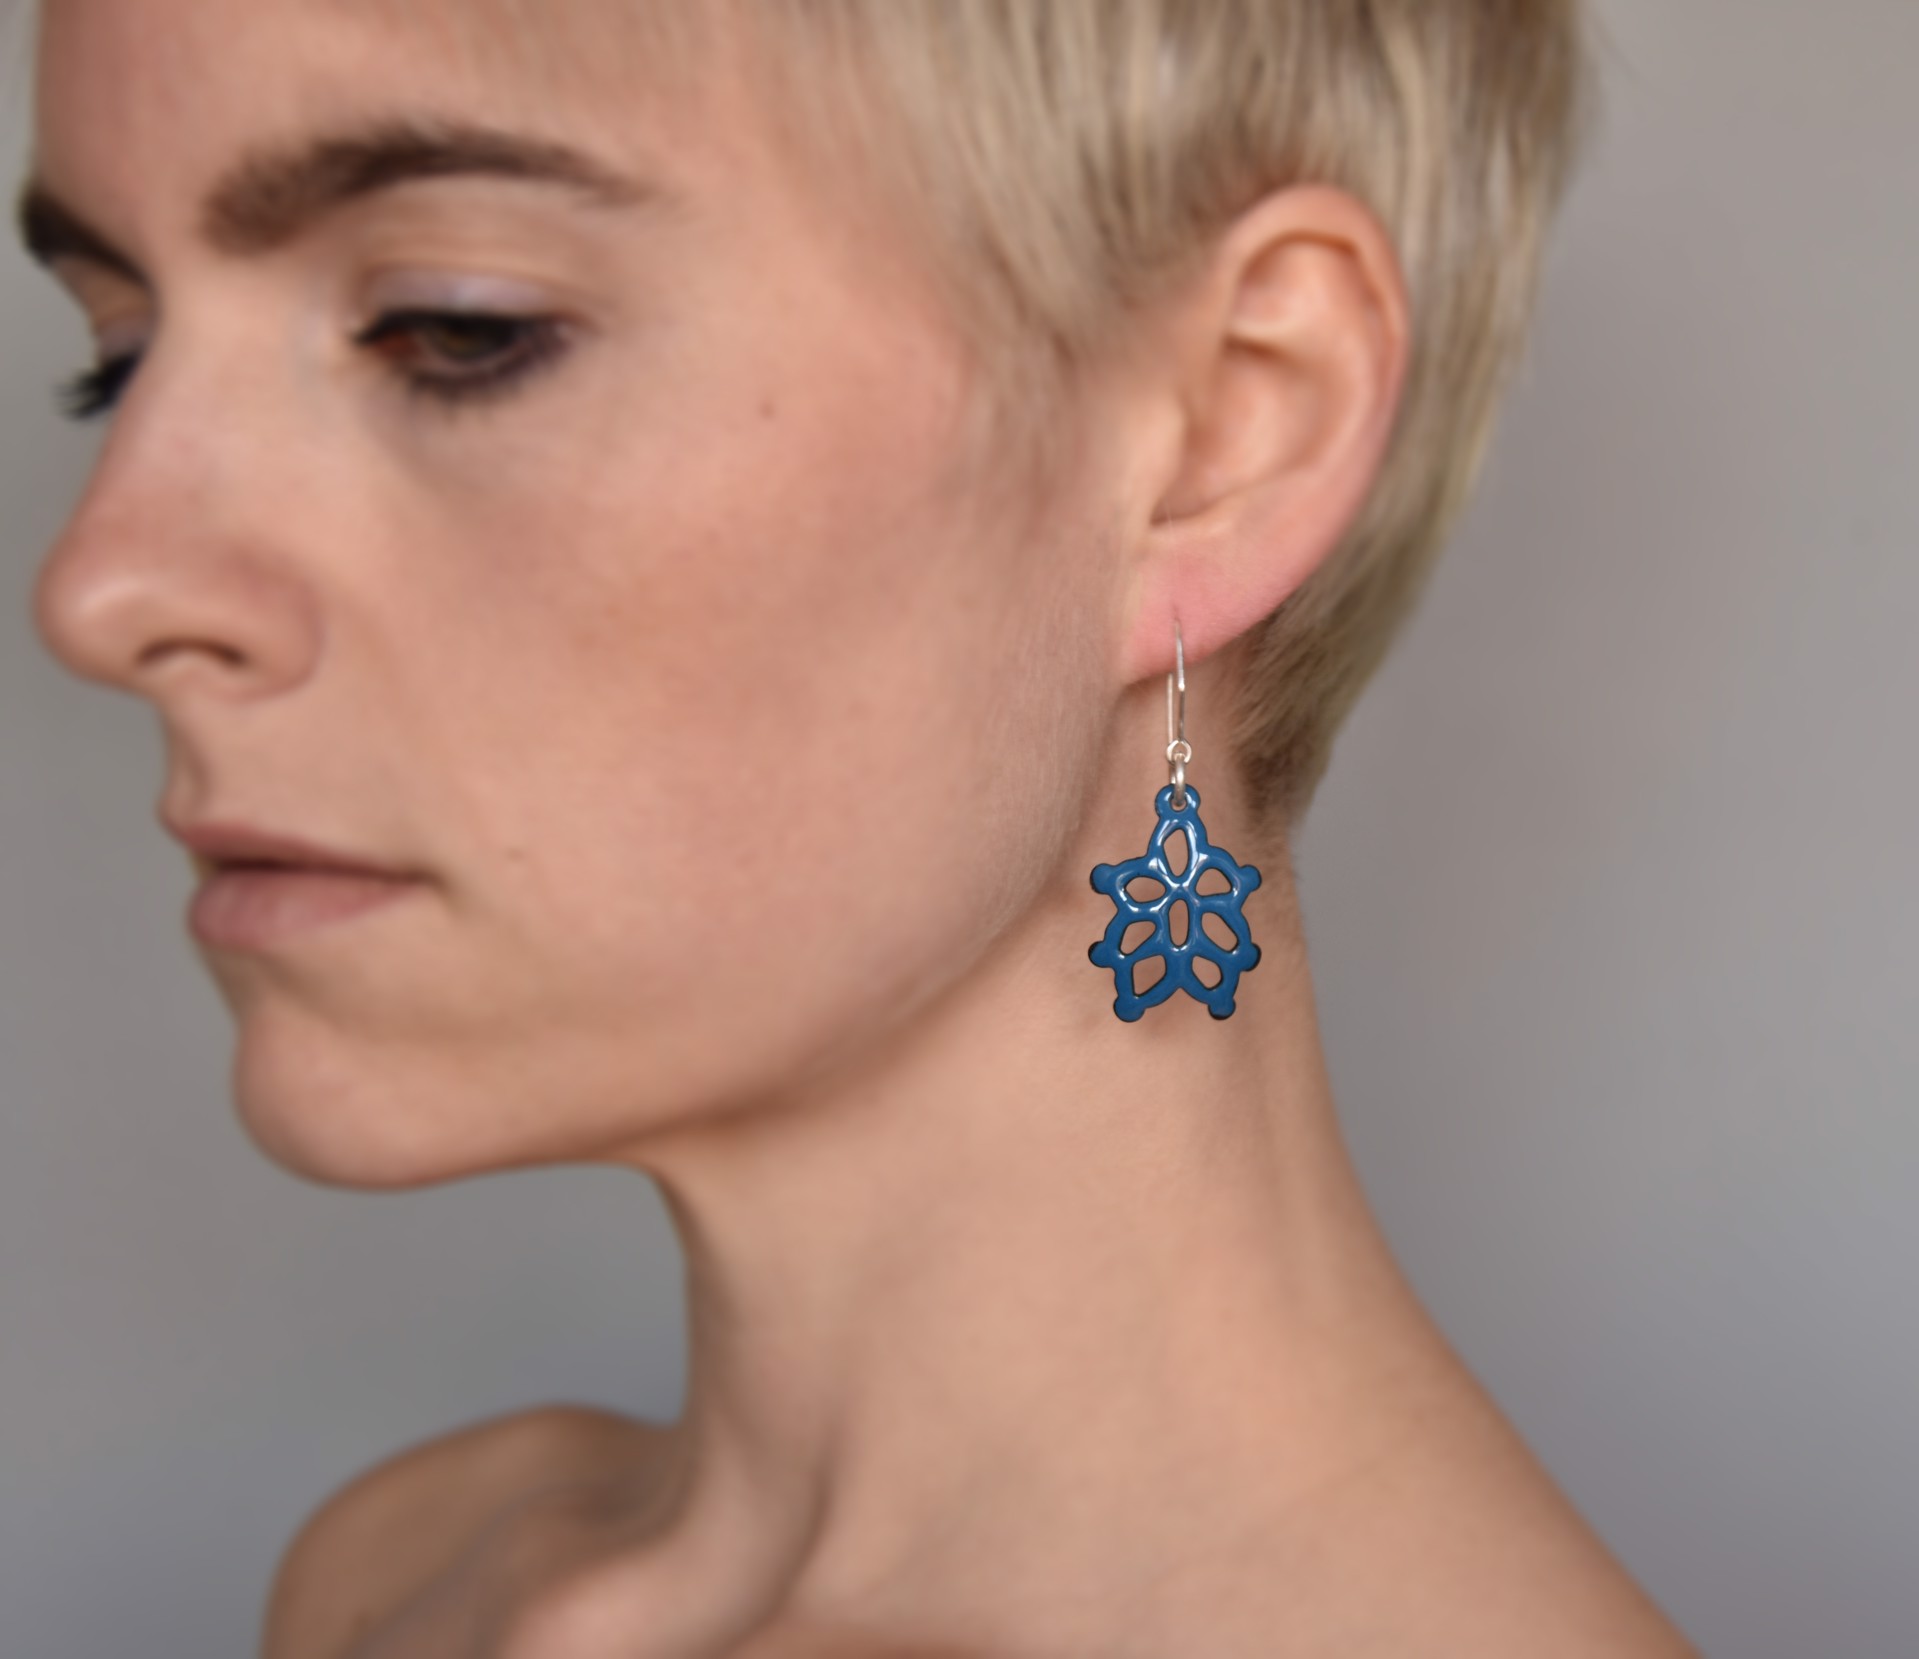 Lotus Structure Earrings by Joanna Nealey